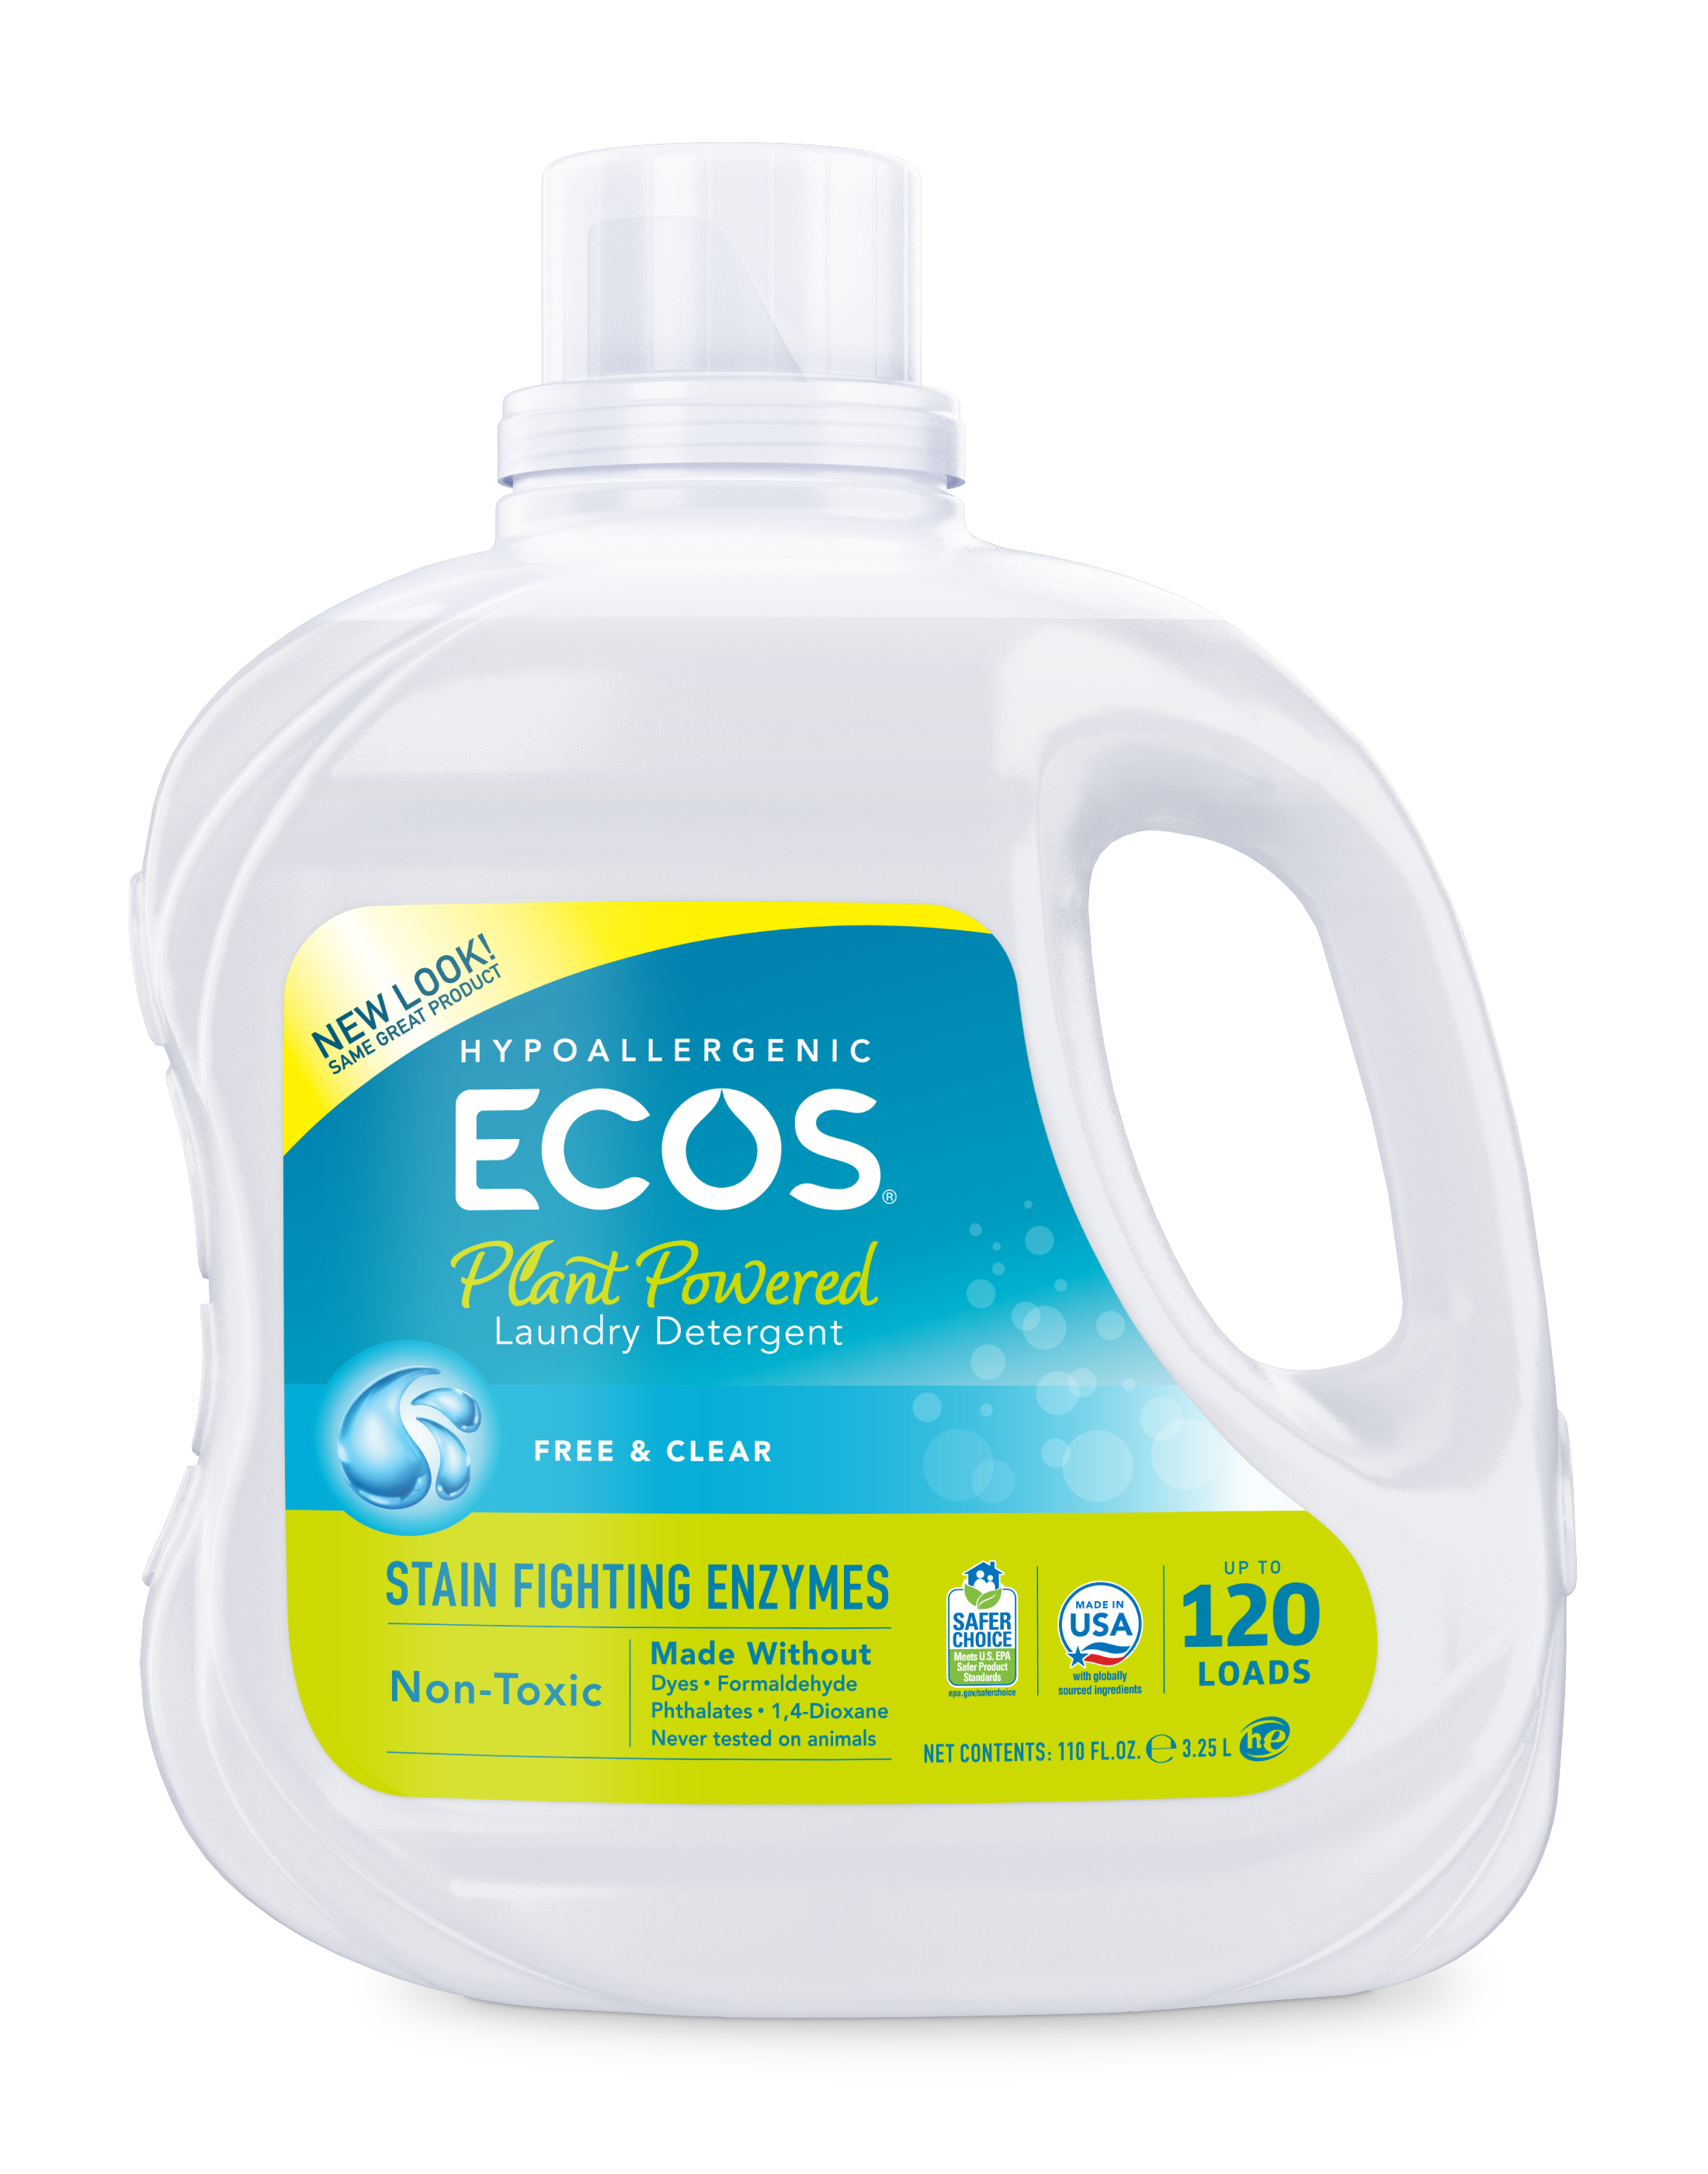 ECOS Plant Powered Liquid Laundry Detergent with Stain-Fighting Enzymes, Free & Clear, 120 Loads, 110 Ounce, Hypoallergenic for sensitive skin - image 1 of 9